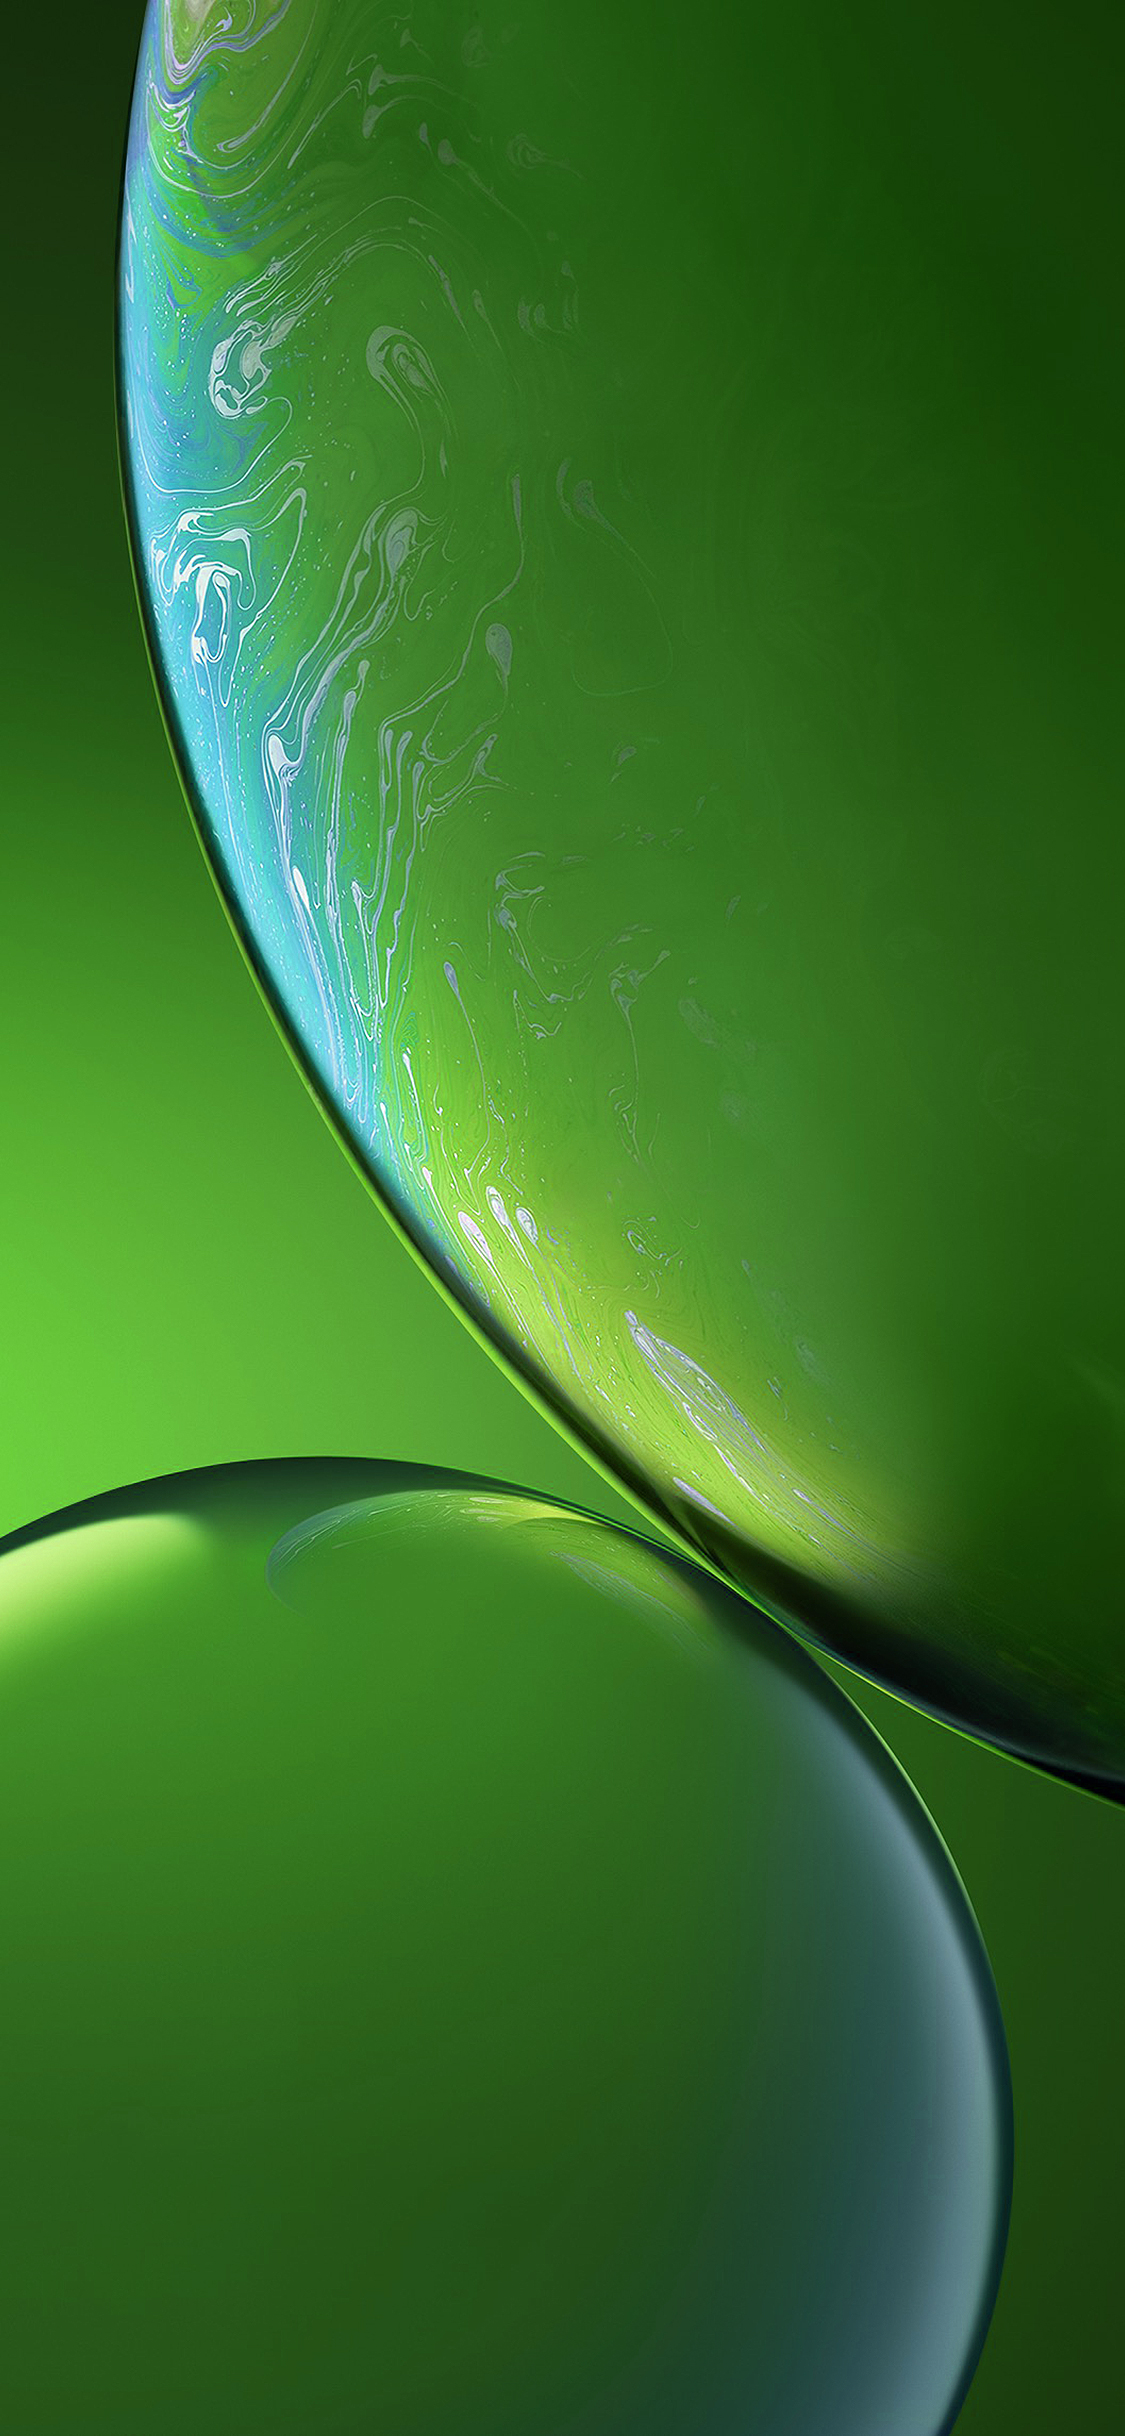 iPhone XR - Bonus - The Missing Color (Green) - Wallpapers Central